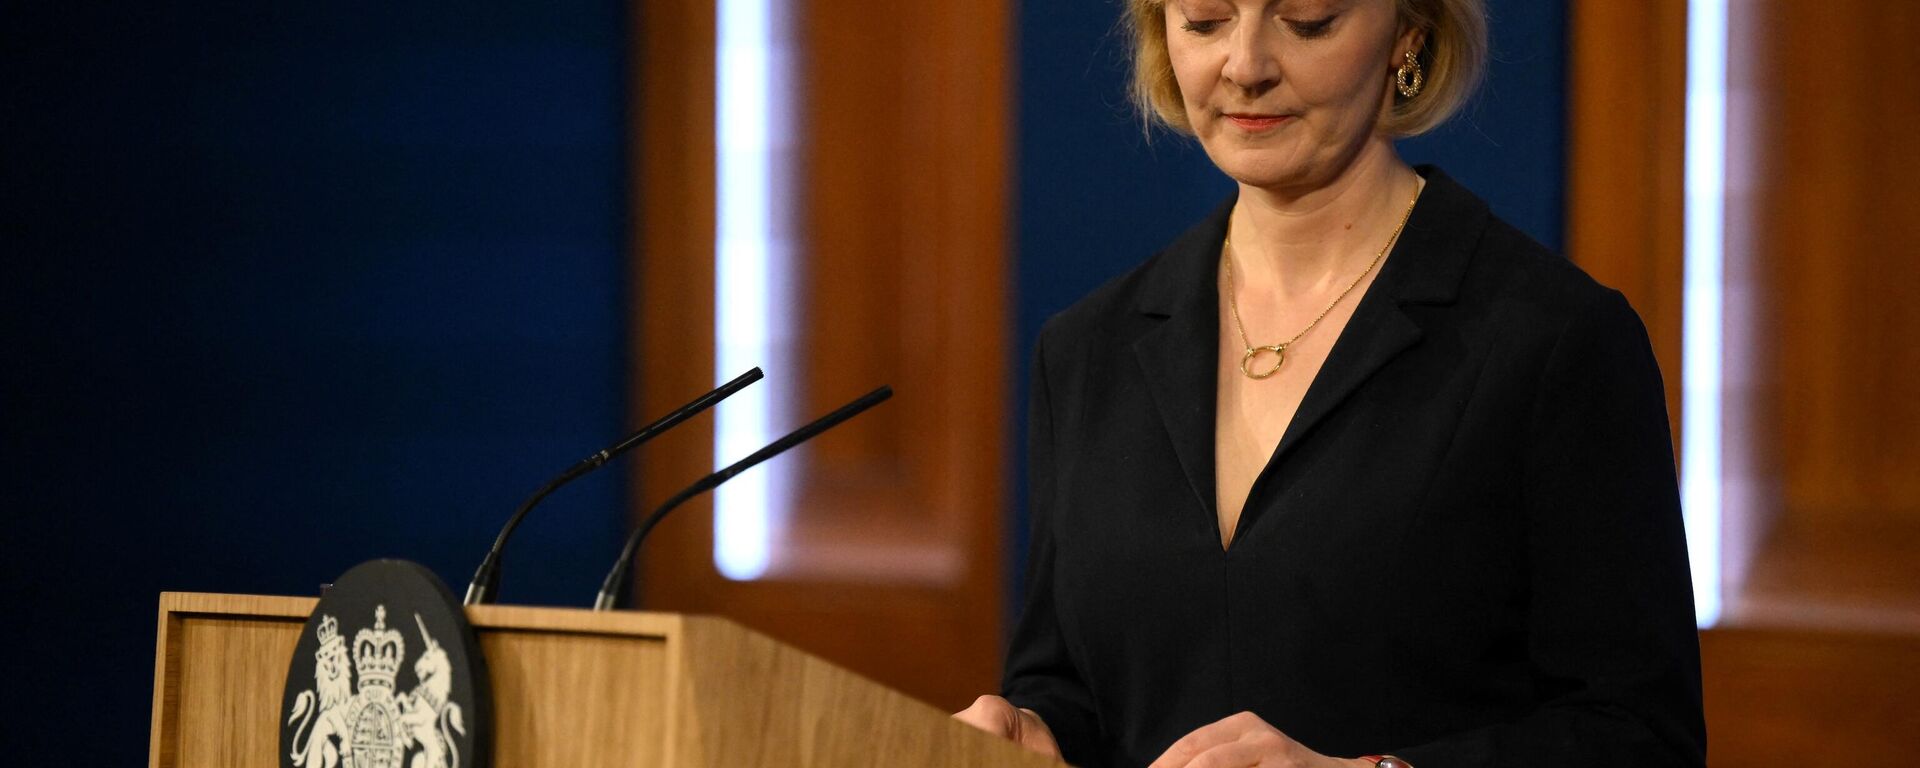 Britain's Prime Minister Liz Truss looks down during a press conference in the Downing Street Briefing Room in central London on October 14, 2022 - Sputnik Srbija, 1920, 01.11.2022